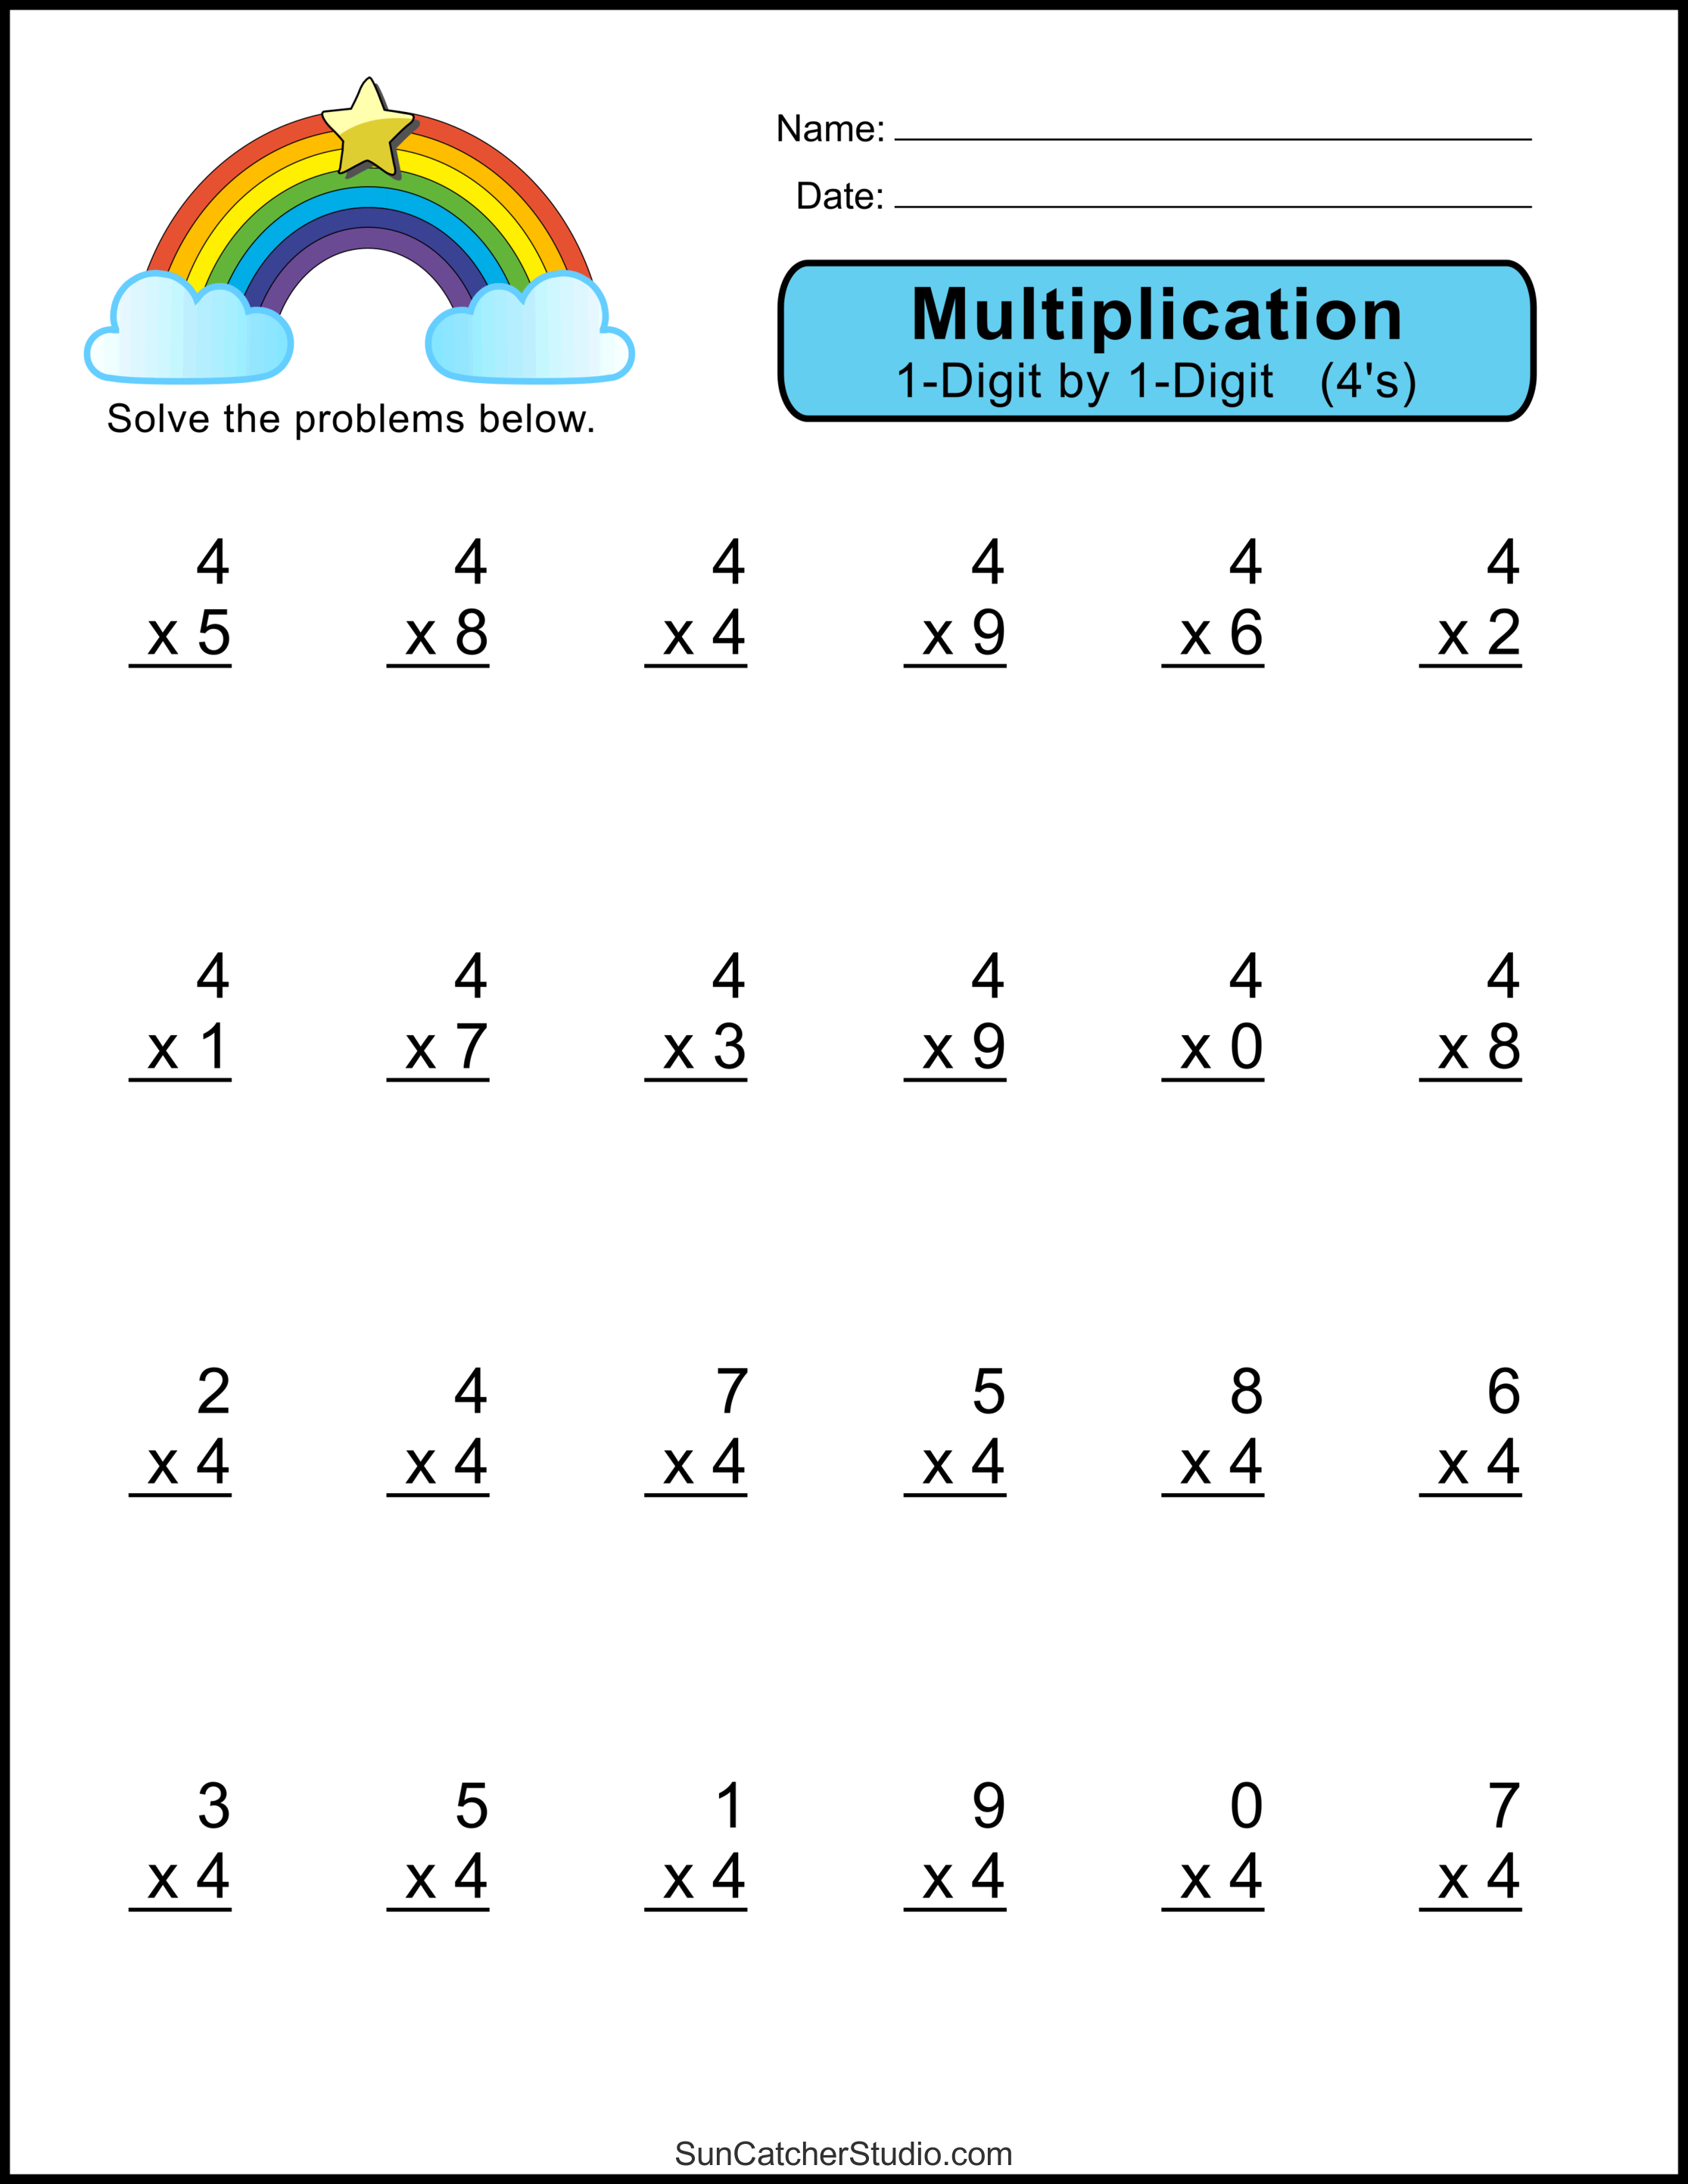 Multiplication Worksheet For Class 3 With Answers